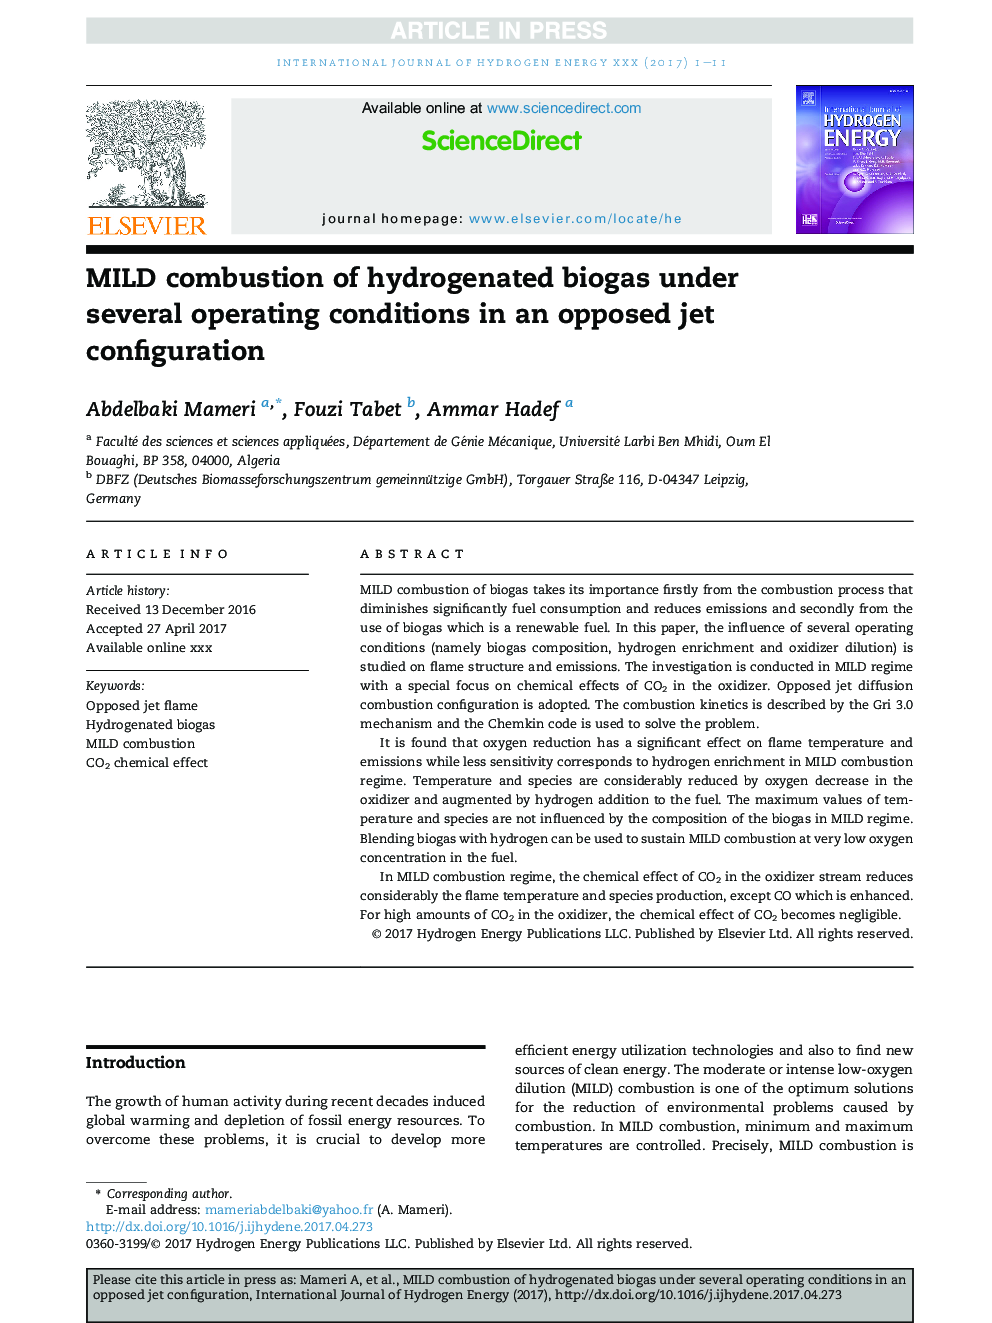 MILD combustion of hydrogenated biogas under several operating conditions in an opposed jet configuration